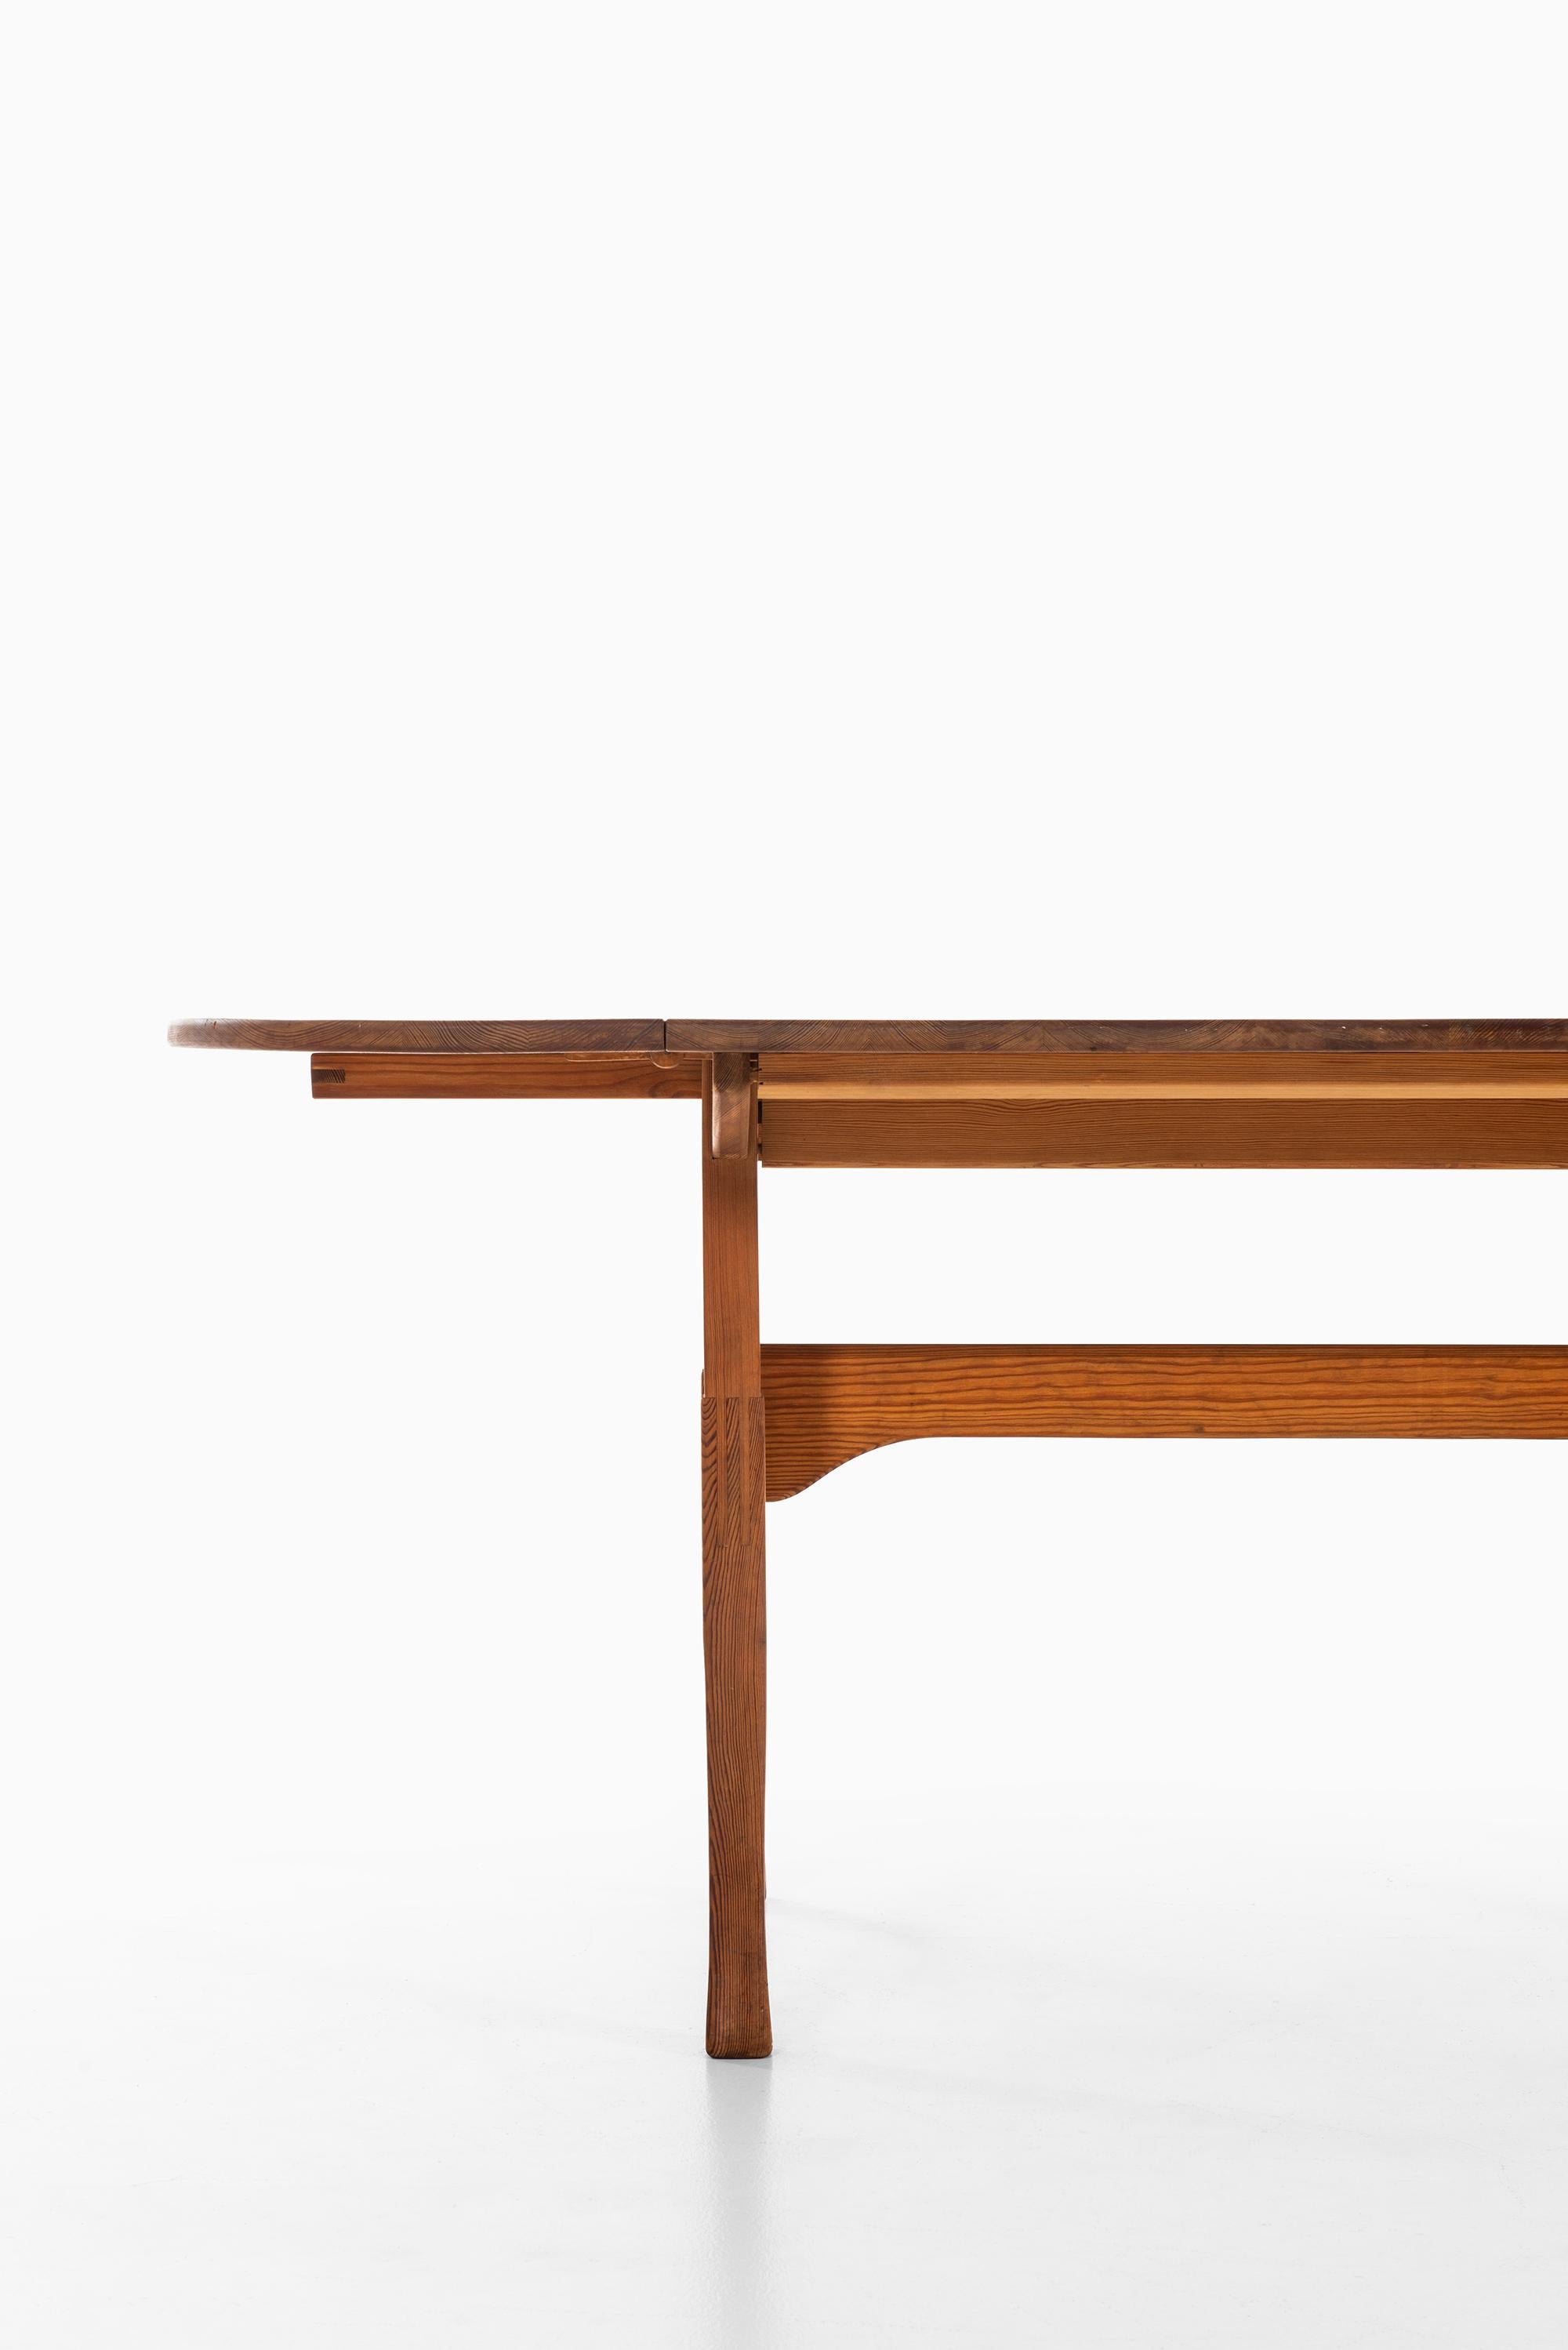 Rare dining table designed by Carl Malmsten. Produced by Karl Andersson & Söner in Sweden.